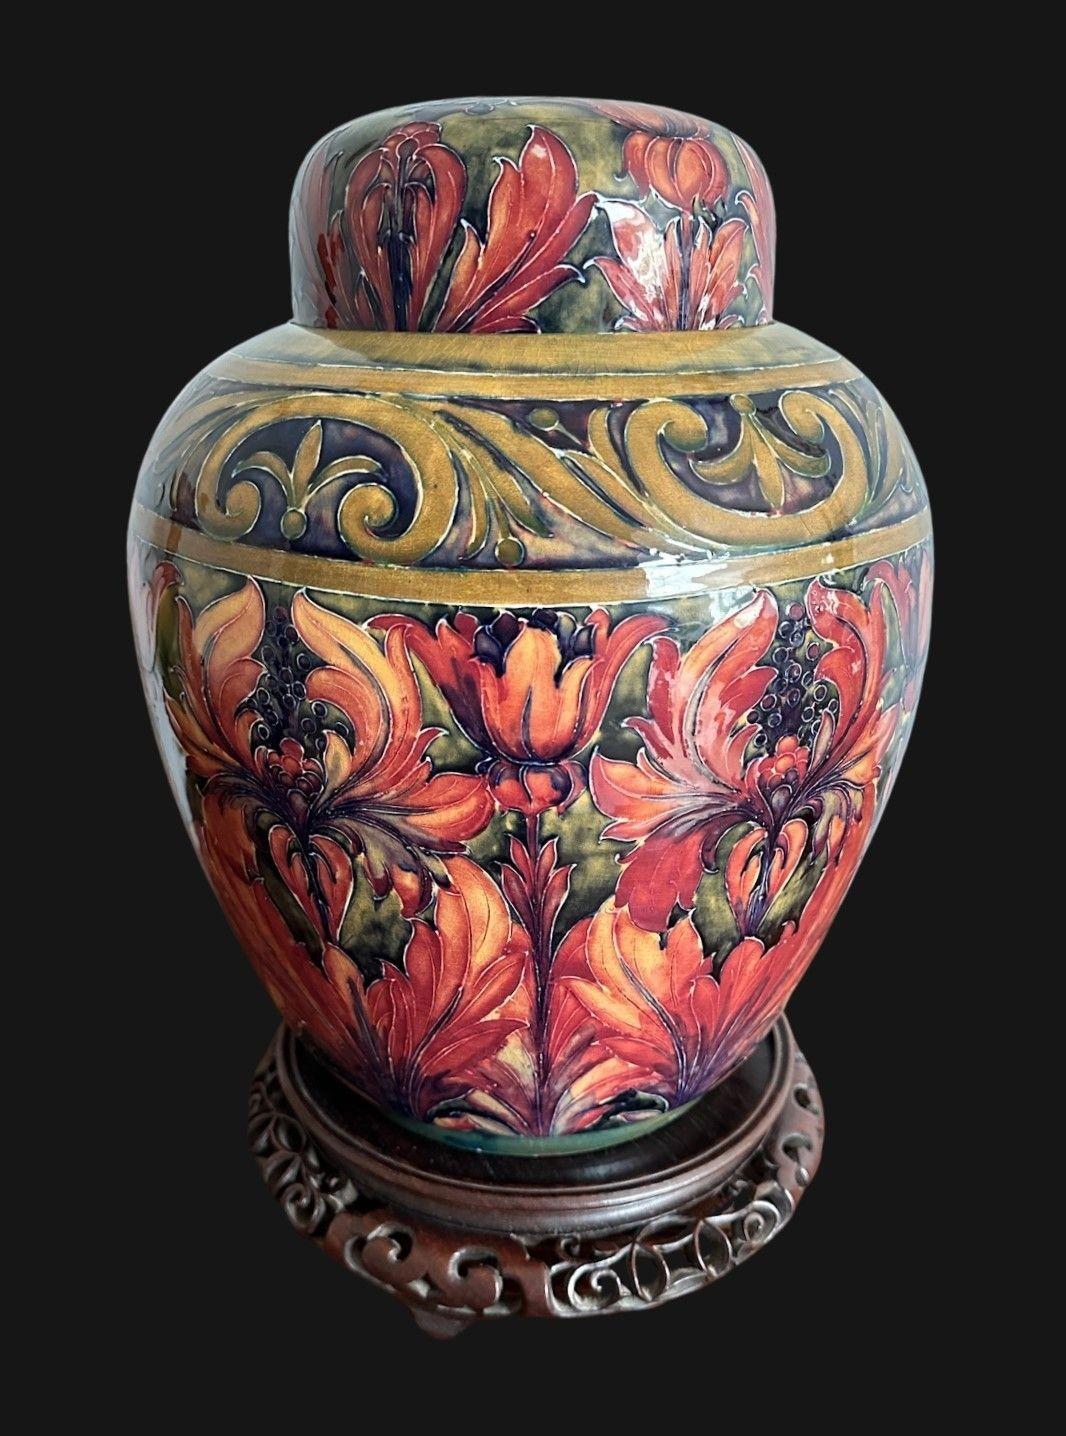 5507
William Moorcroft Ginger Jar Lampbase on a carved hardwood stand
Decorated in the Spanish Design and featured on Page 83 of “William Moorcroft” by Atterbury, this is likely an exhibition piece and is dated 1914
33cm high, 23.5cm wide